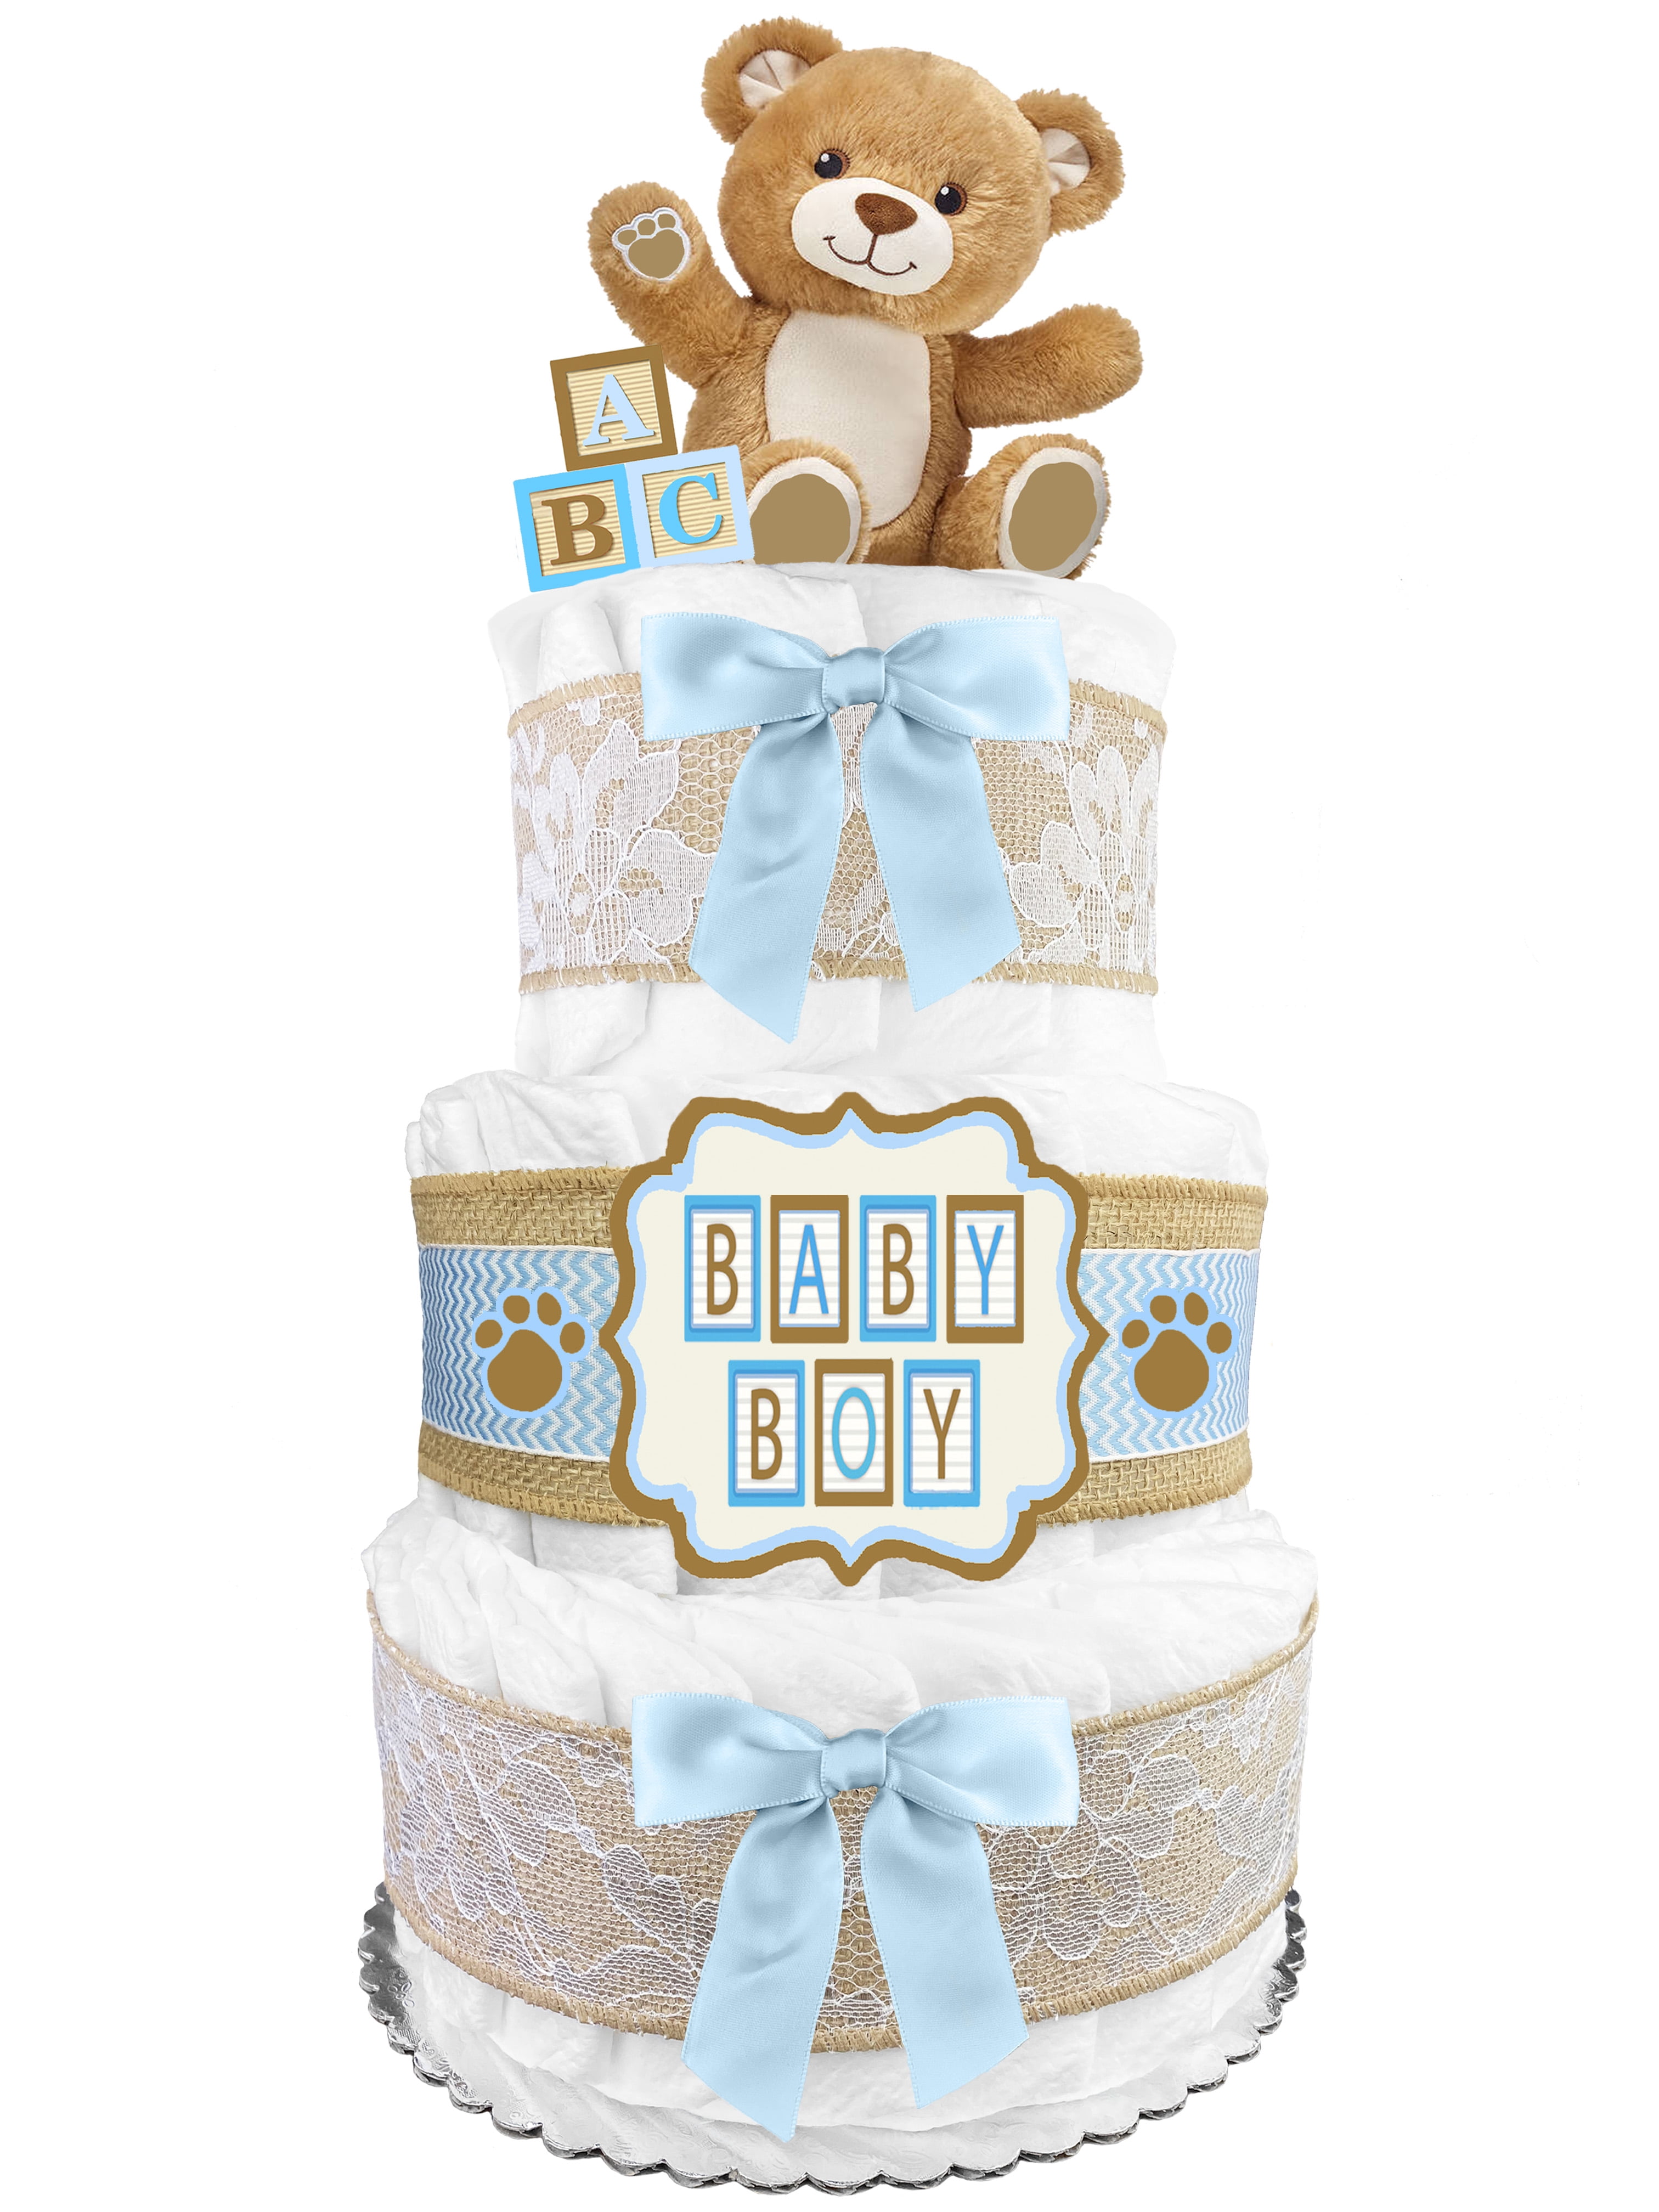 Unisex Baby Boy Girl Two Tier Nappy Cake with Cute Lamb and Wall Plaque New Born Baby Shower Gift